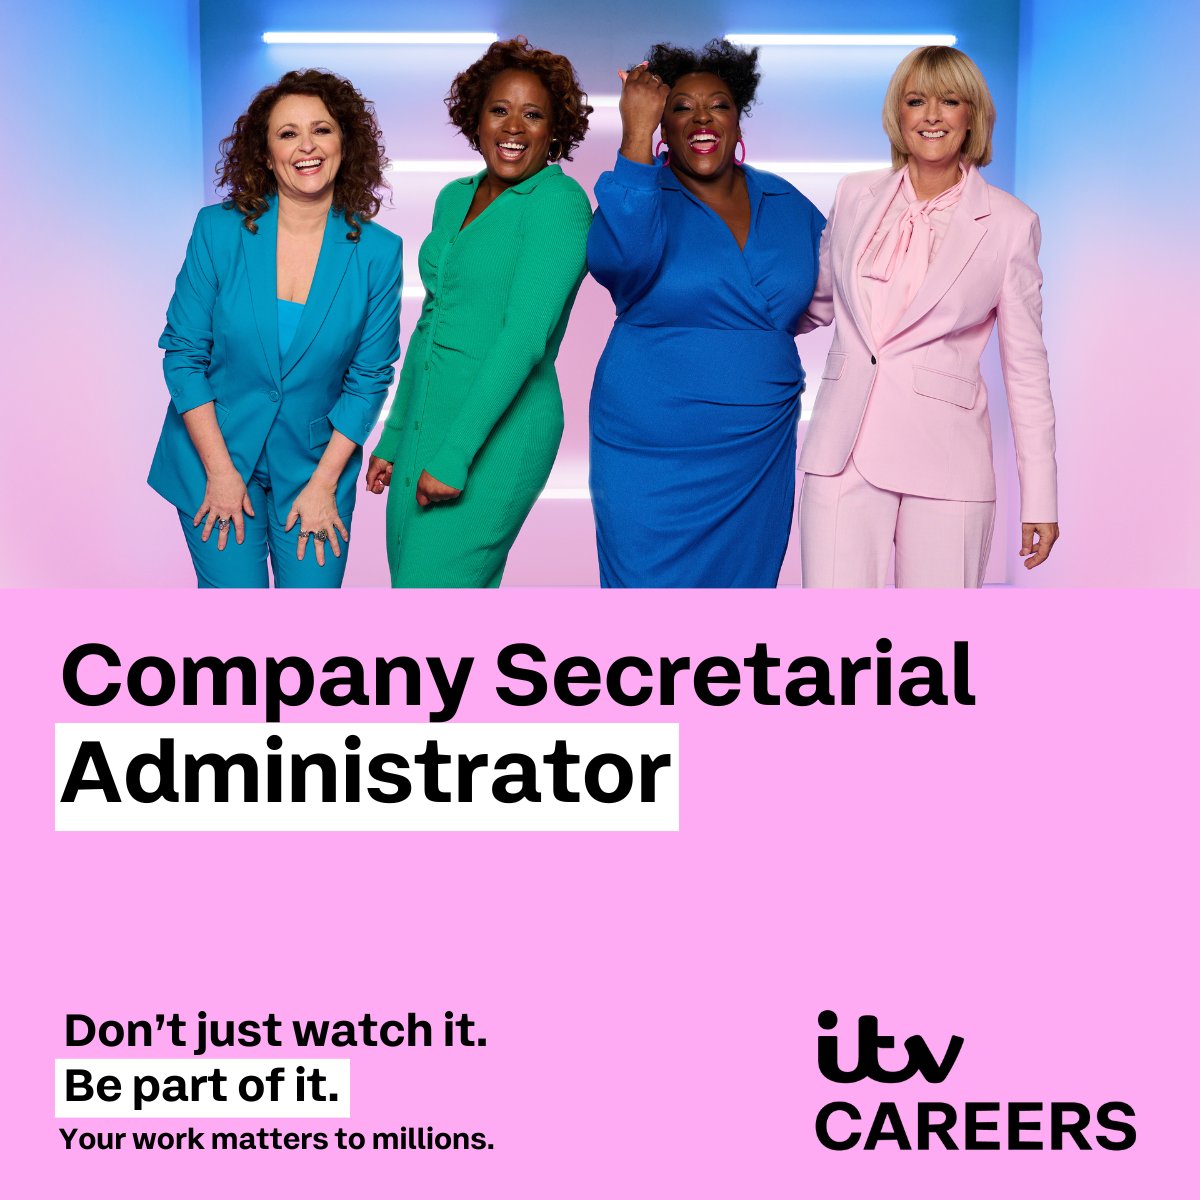 As part of the Group Secretariat team, we are looking for a Company Secretarial Administrator to join us and provide vital support to all members of the team. Find out more here: itvjobs.referrals.selectminds.com/jobs/company-s… #ITVCareers #Hiring #AdministratorJobs